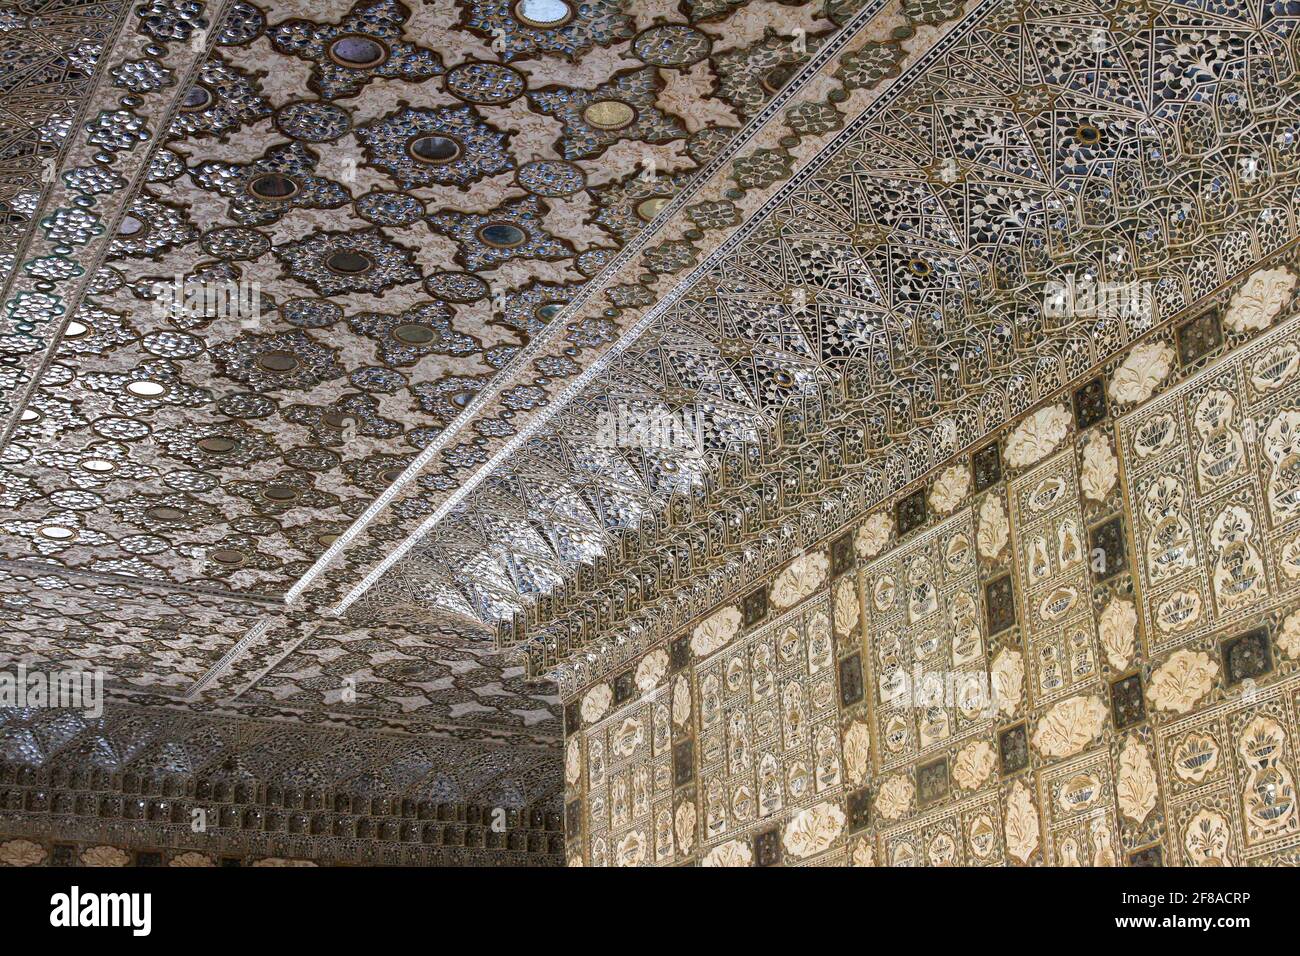 Beautiful mirrored ceiling in Amber Fort, Amer, Rajasthan, India Stock Photo